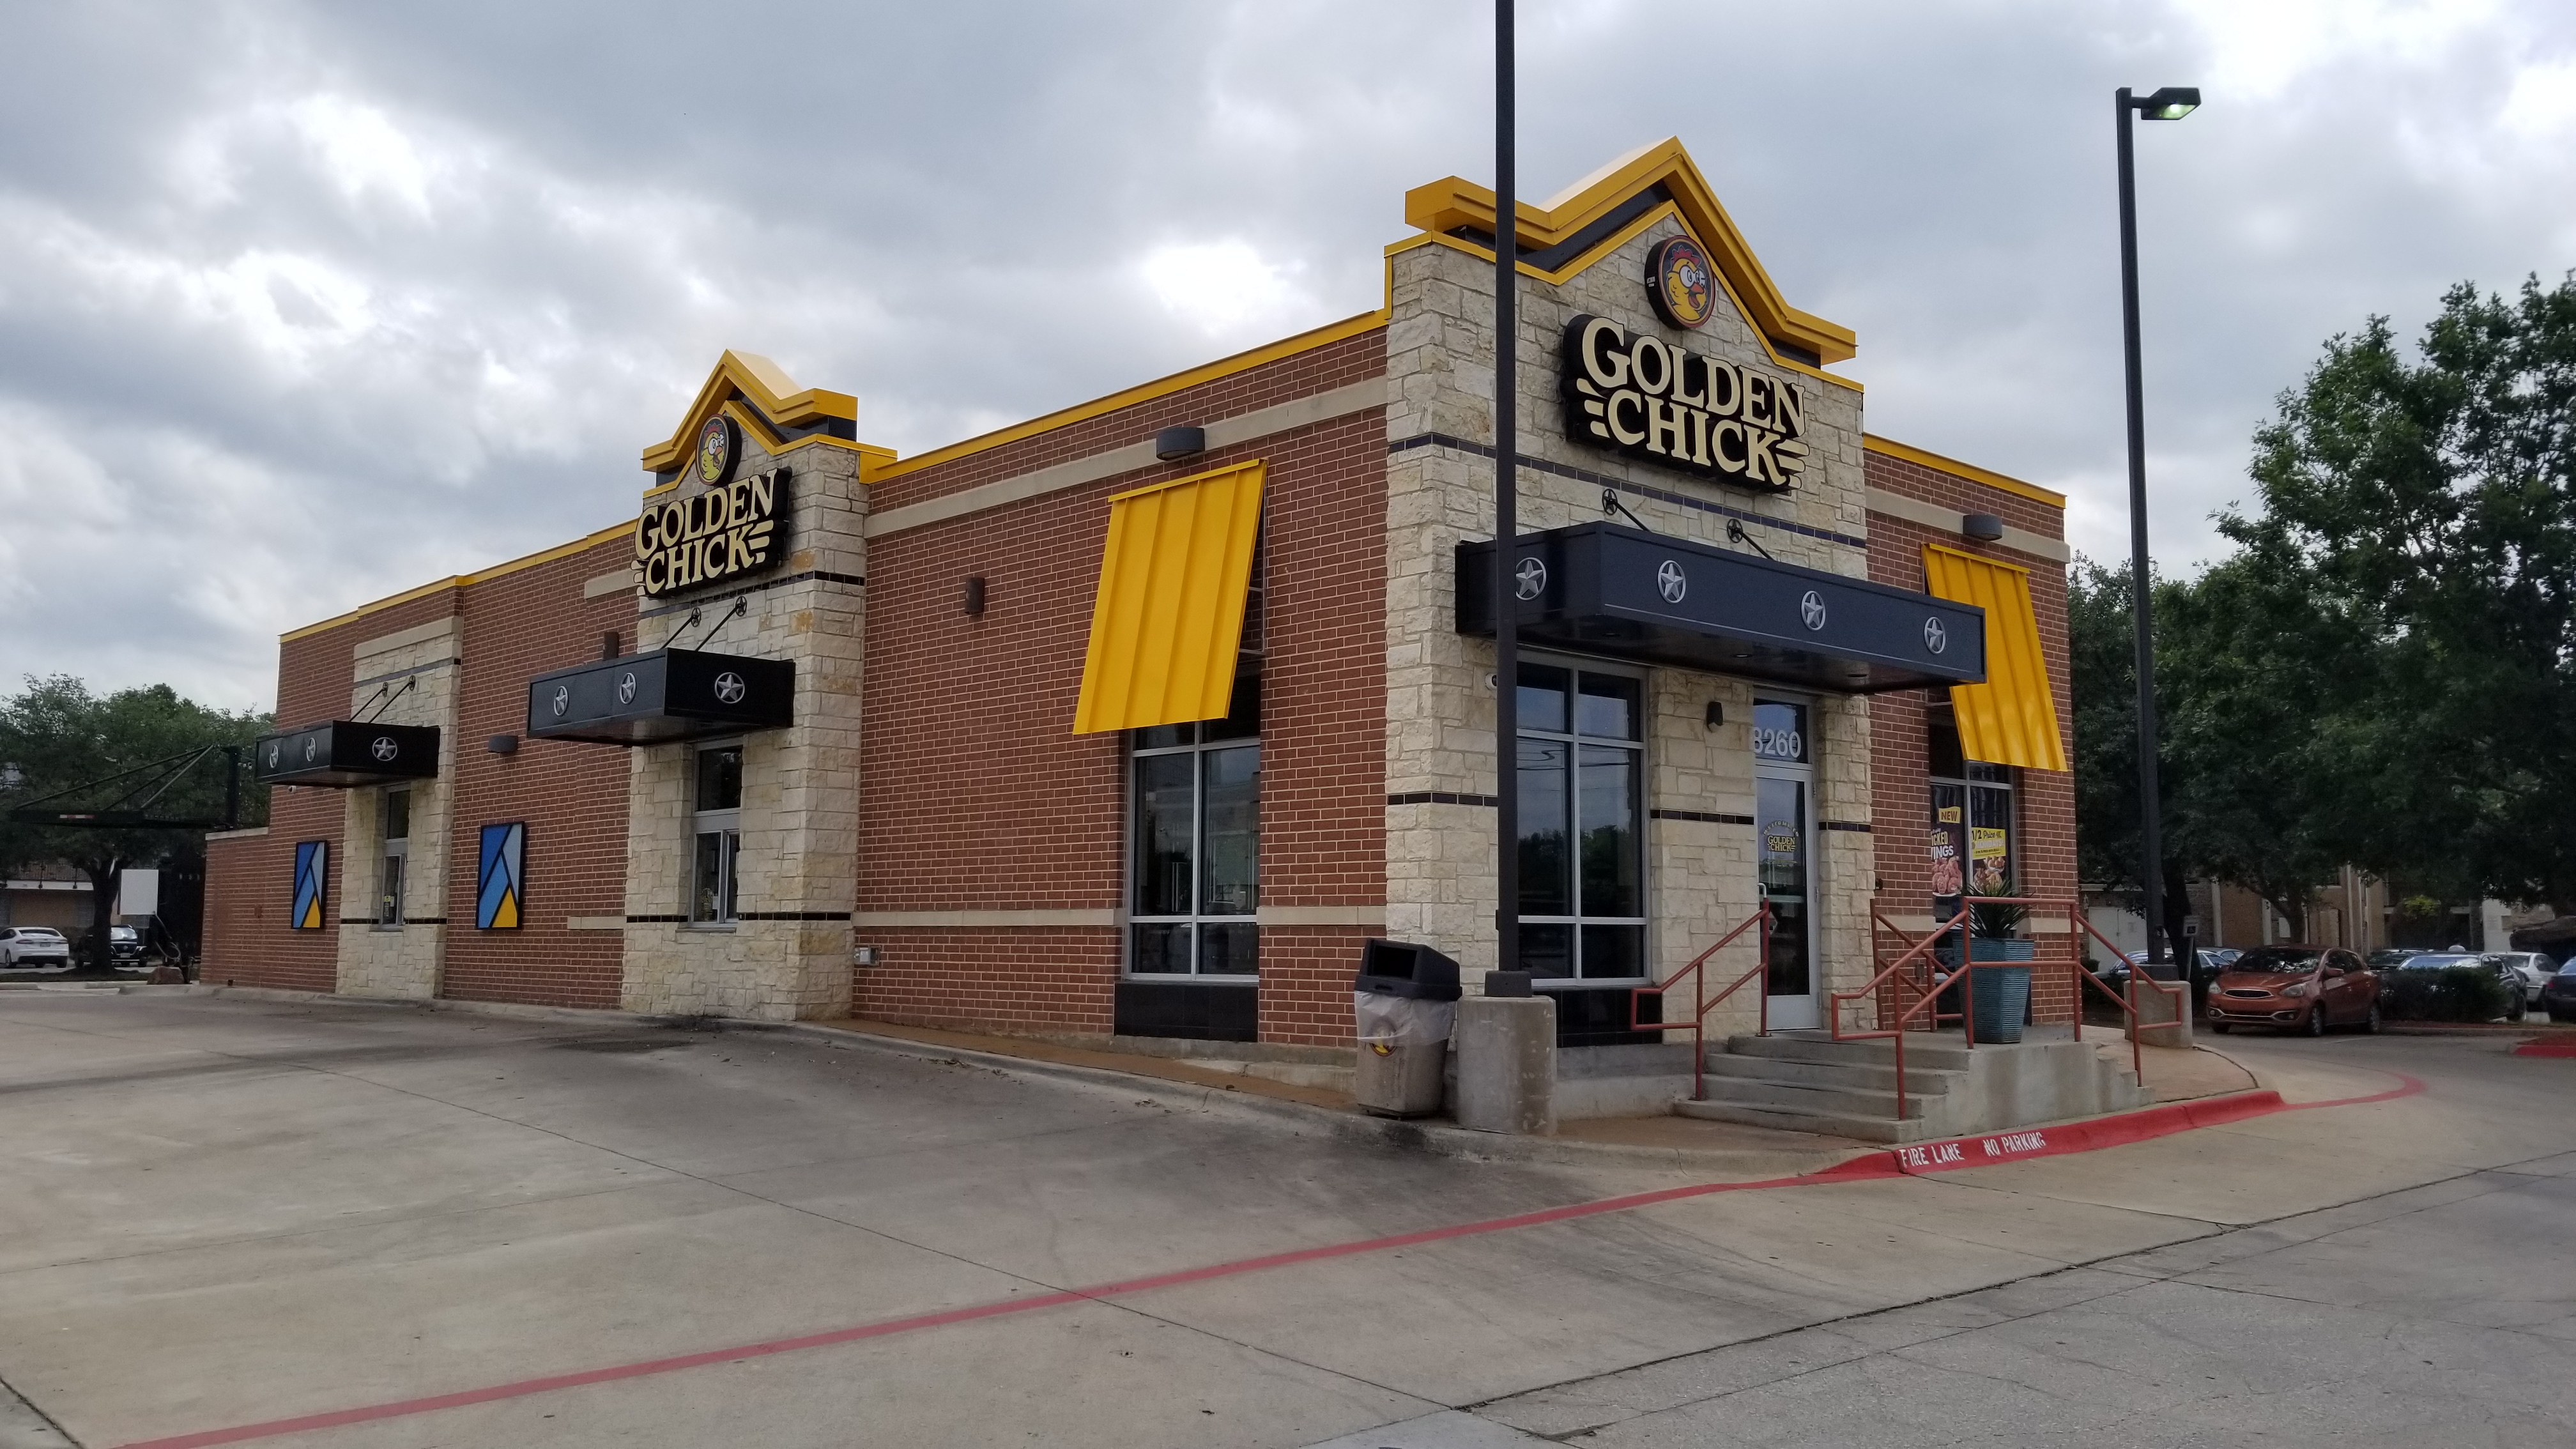 Golden Chick storefront.  Your local Golden Chick fast food restaurant in Dallas, Texas